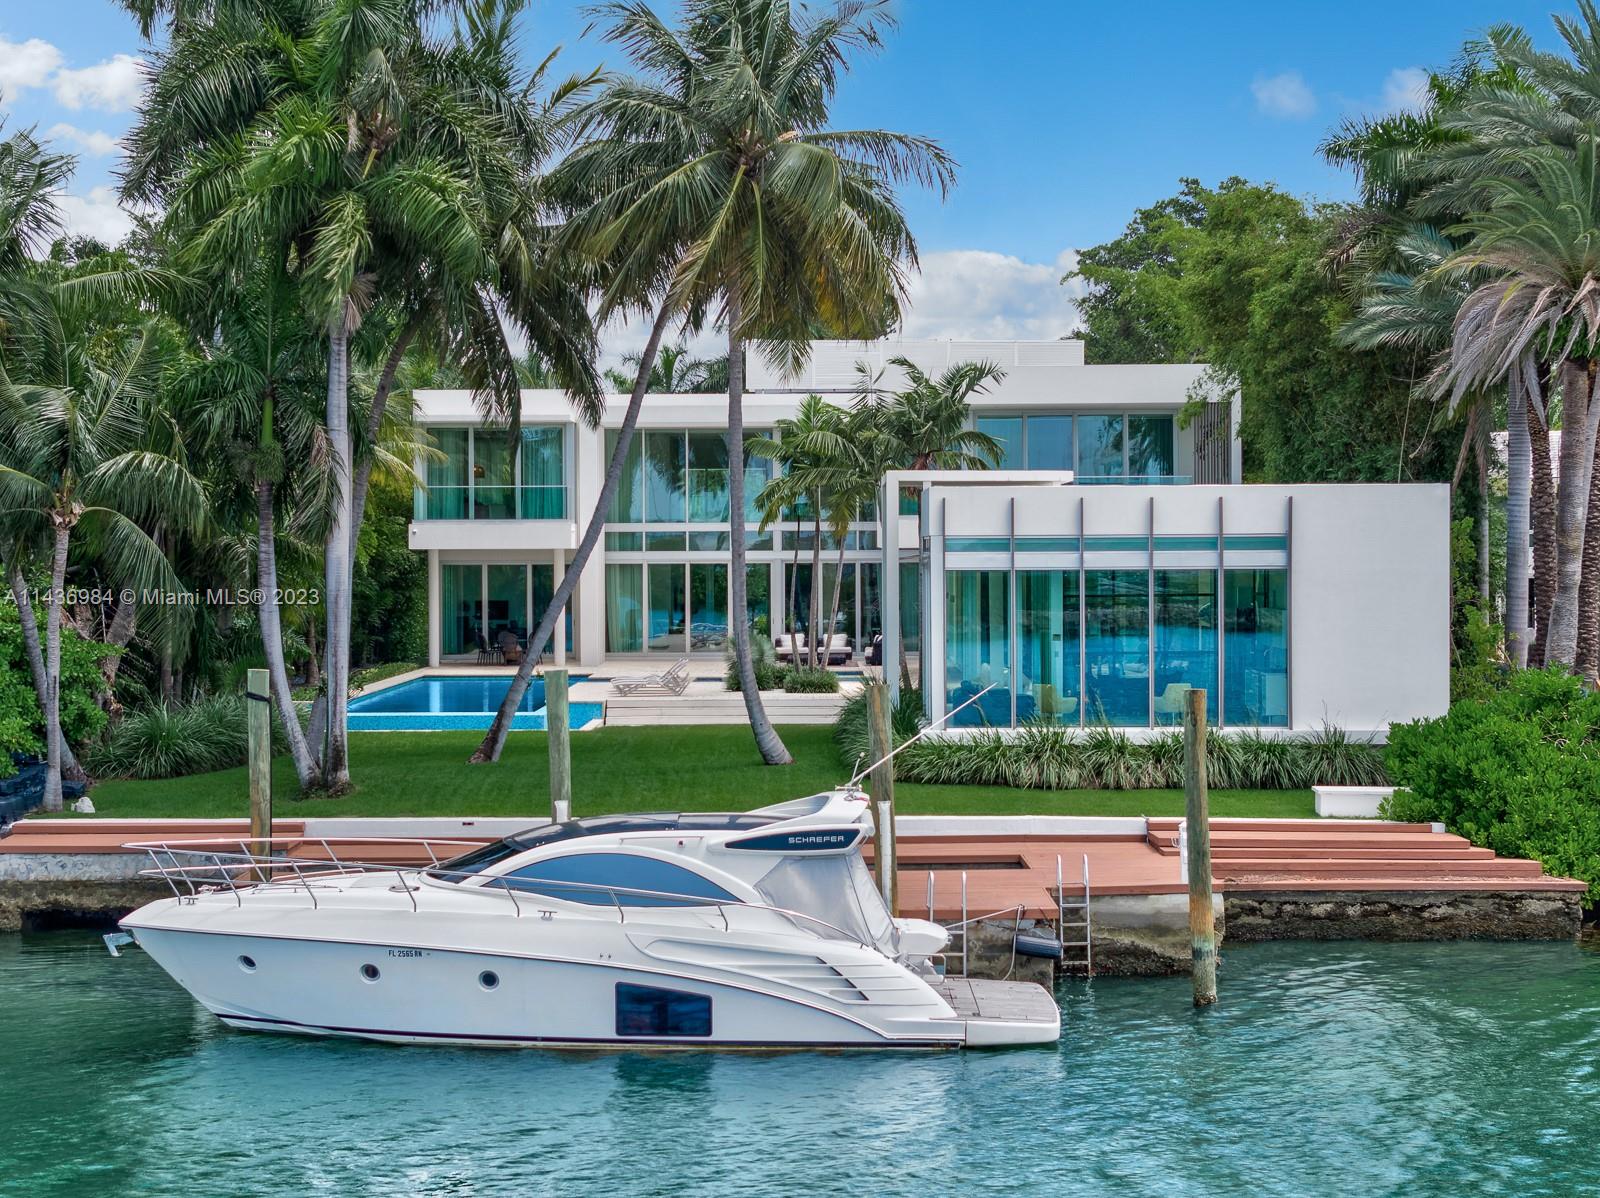 In a league of its own, this modern estate redefines luxury living on guard gated Palm Island. Nestled on an expansive 32,000 SF lot, enjoy 9 beds 8/1 baths perfectly set on 13,144 SF of total area. The chef’s kitchen is an epicurean delight w top of the line appliances, water views and walk in refrigerator. The expansive primary suite features private balcony, oversized closets, marble bathroom and private balcony. Entertaining is elevated to an art form with numerous outdoor areas thoughtfully integrated into the estate's design all with bay and skyline views. Highlights include wine cellar, movie theater, gym, staff area with dual rooms, pet room and elevator. Private dock, 100 feet of water frontage and direct ocean access complete this masterpiece. When only the best will do.